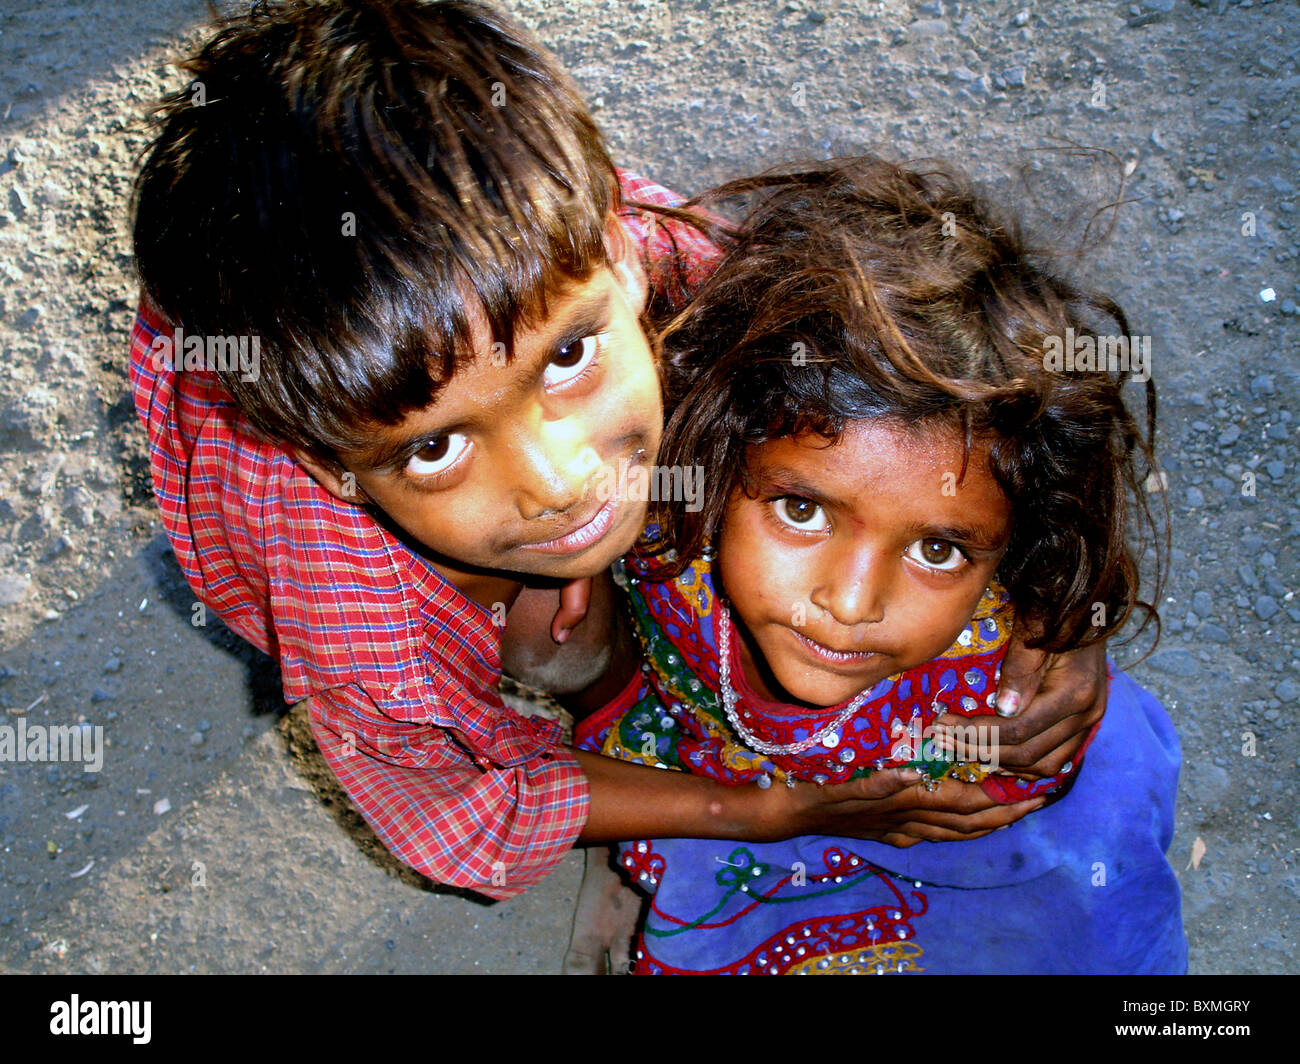 portrait or close up shot of two indian street kids with innocence in face from the streets of india Stock Photo